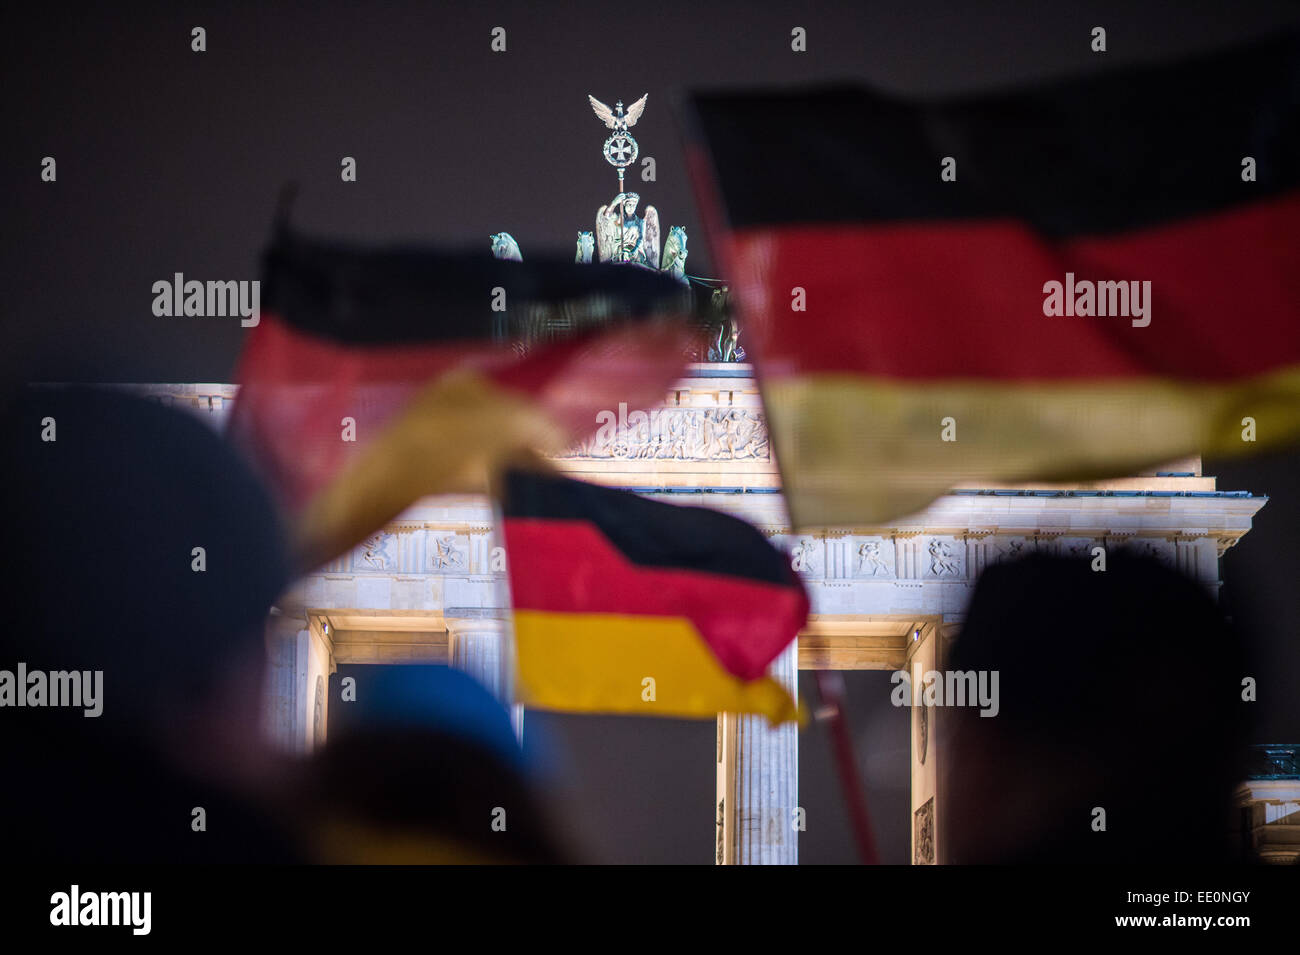 Berlin, Germany. 12th Jan, 2015. Members of the 'Baergida' (Berlin Patriots against the Islamization of the west) alliance, an off-shoot of the 'Pegida' (Patriotic Europeans Against the Islamization of the West) movement, protest with German flags in front of the Brandenburg Gate in Berlin, Germany, 12 January 2015. For weeks the anti-Islamic, right-wing populist movement Pegida has been organizing demonstrations against supposed foreign infiltration in various cities. Photo: BERND VON JUTRCZENKA/dpa/Alamy Live News Stock Photo